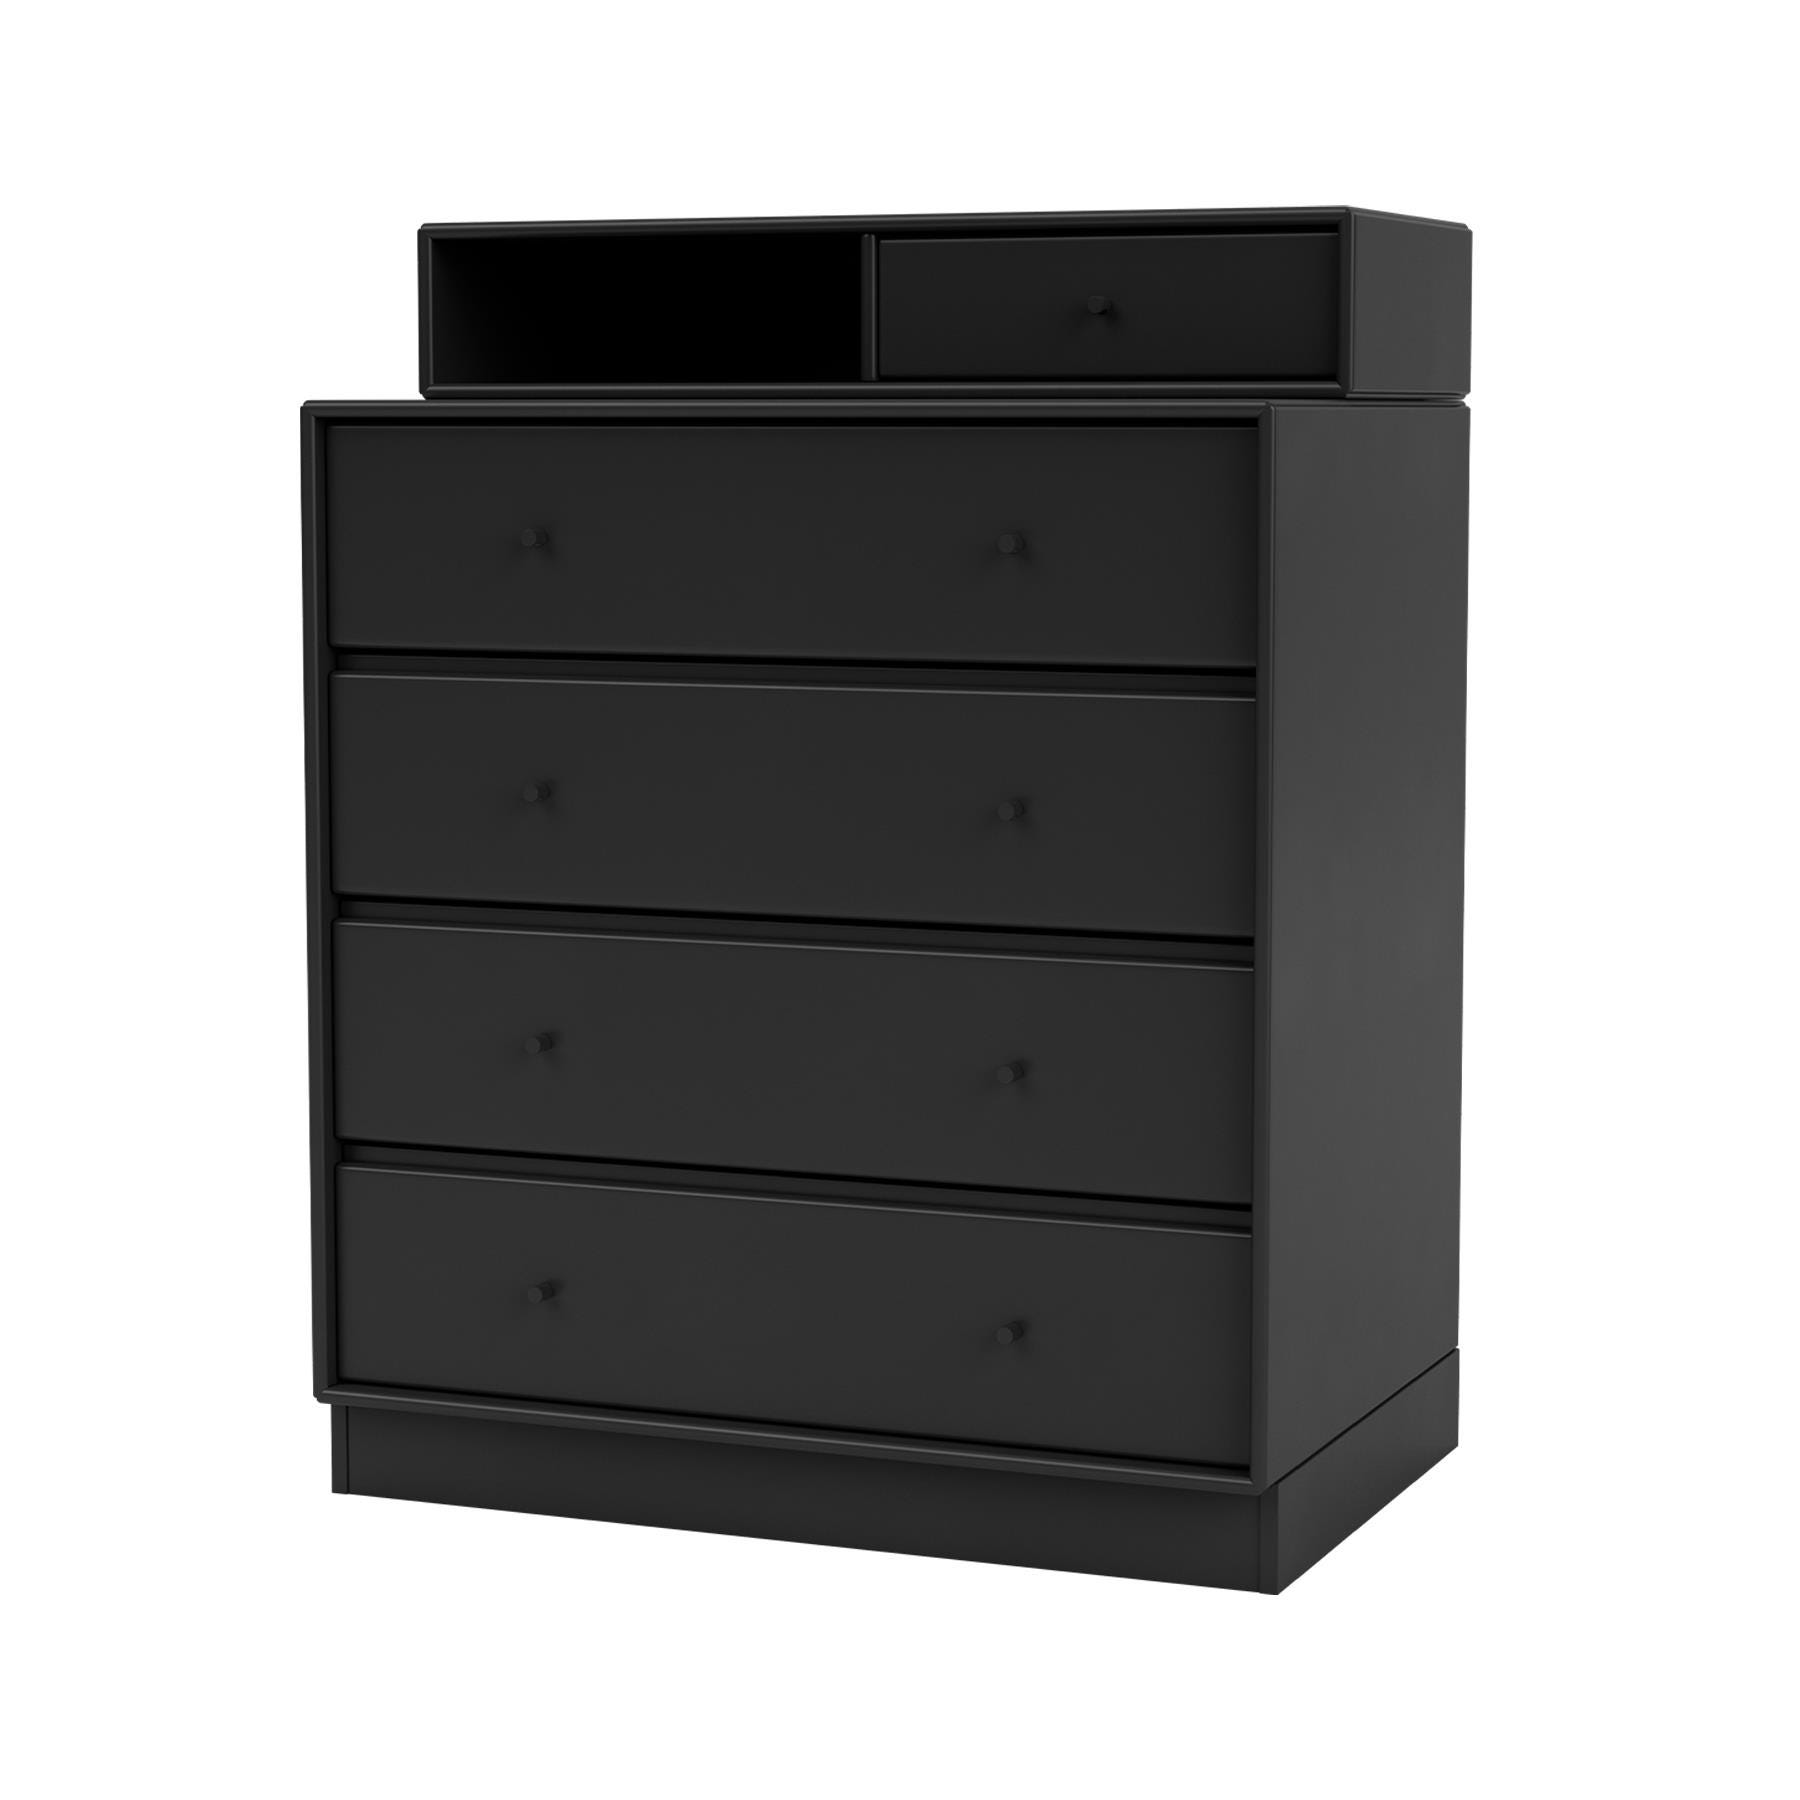 Montana Keep Chest Of Drawers Black Plinth Black Designer Furniture From Holloways Of Ludlow